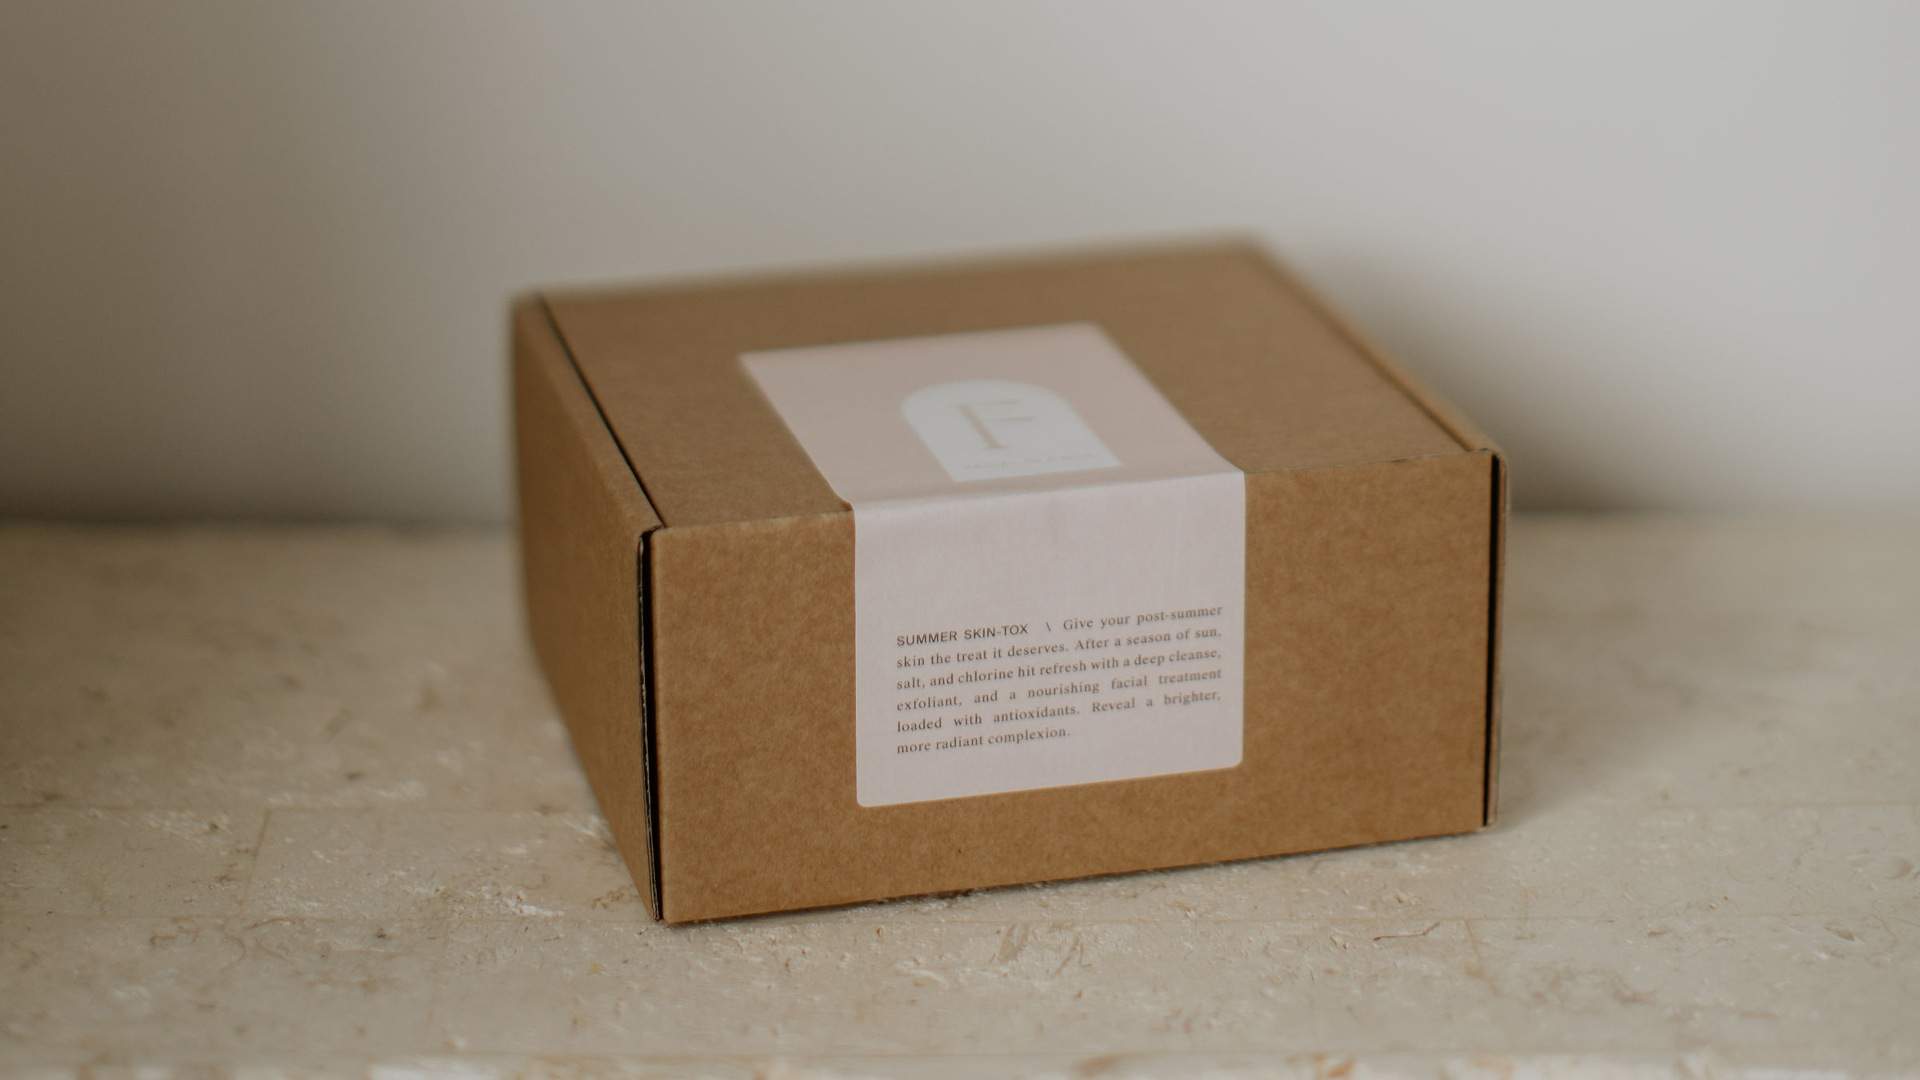 The Facialist Has Brought Back Its Facial in a Box to Turn Your Home Into a Spa During Iso